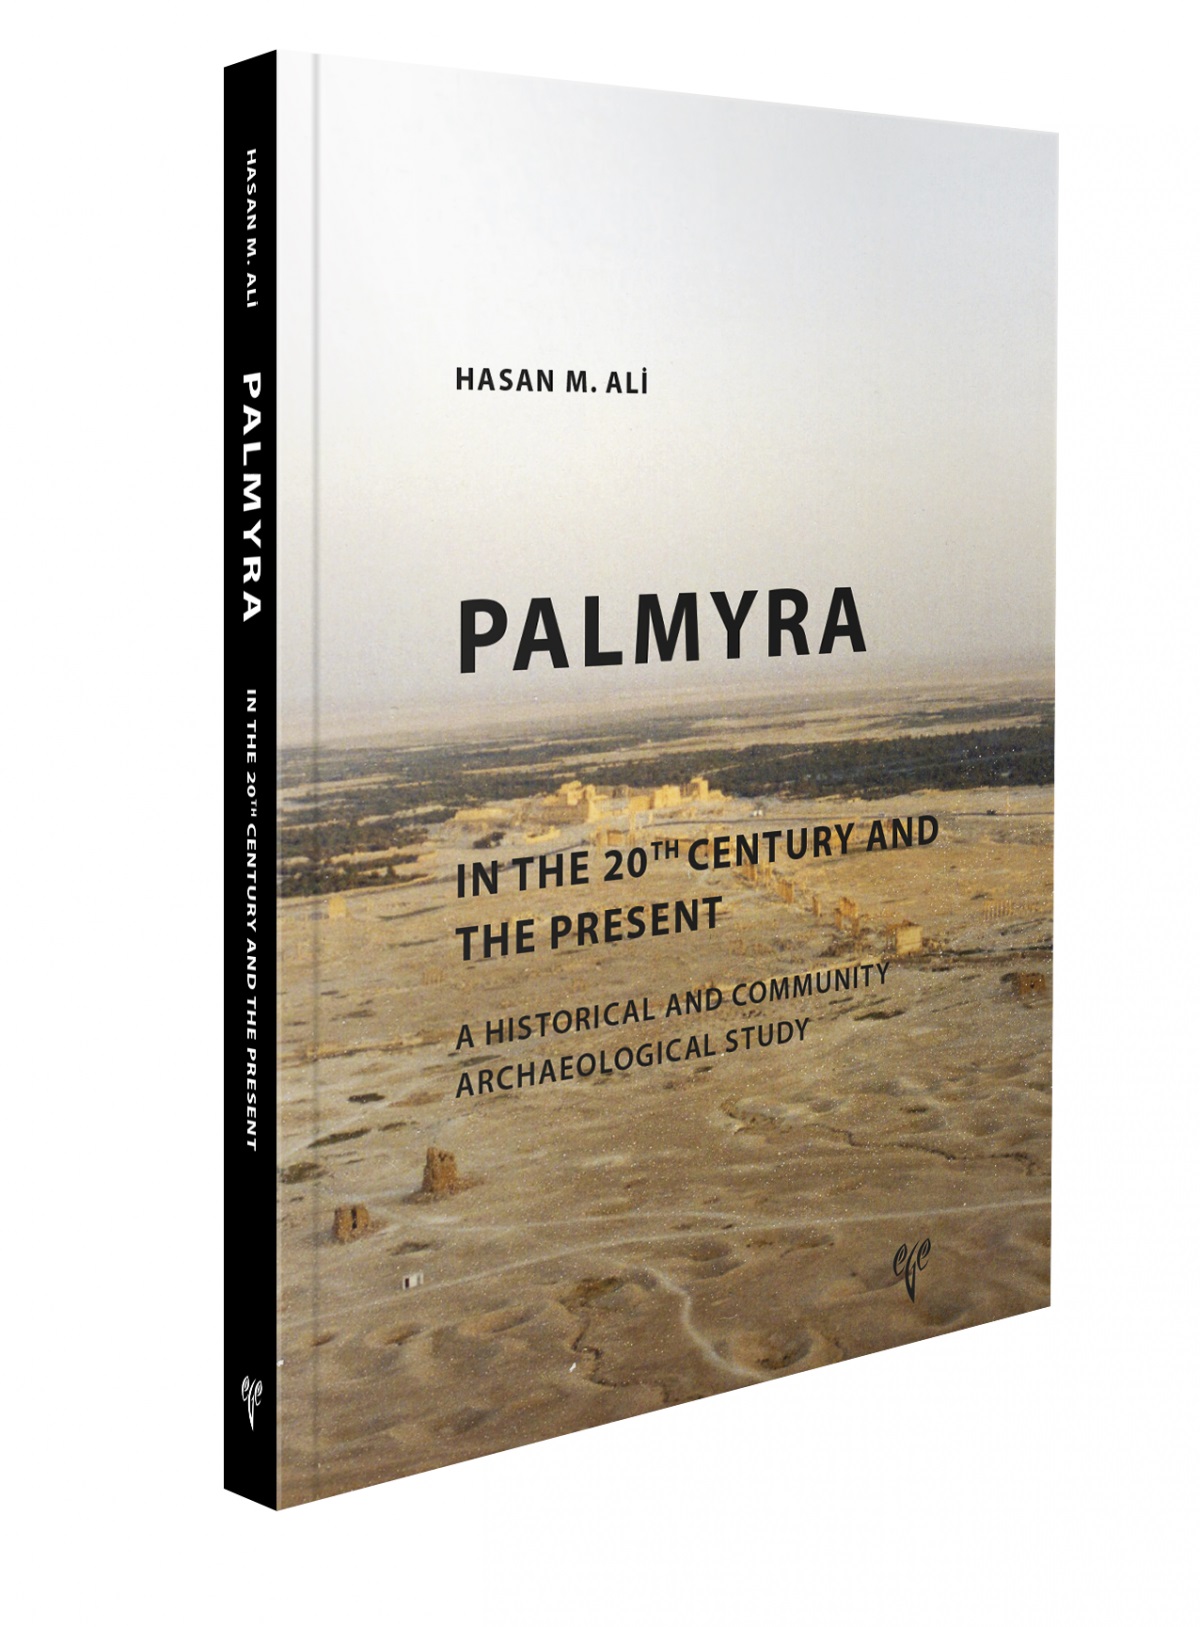 Ali, Hasan M. : Palmyra. In the 20th Century and the Present. A Historical and Community Archaeological Study